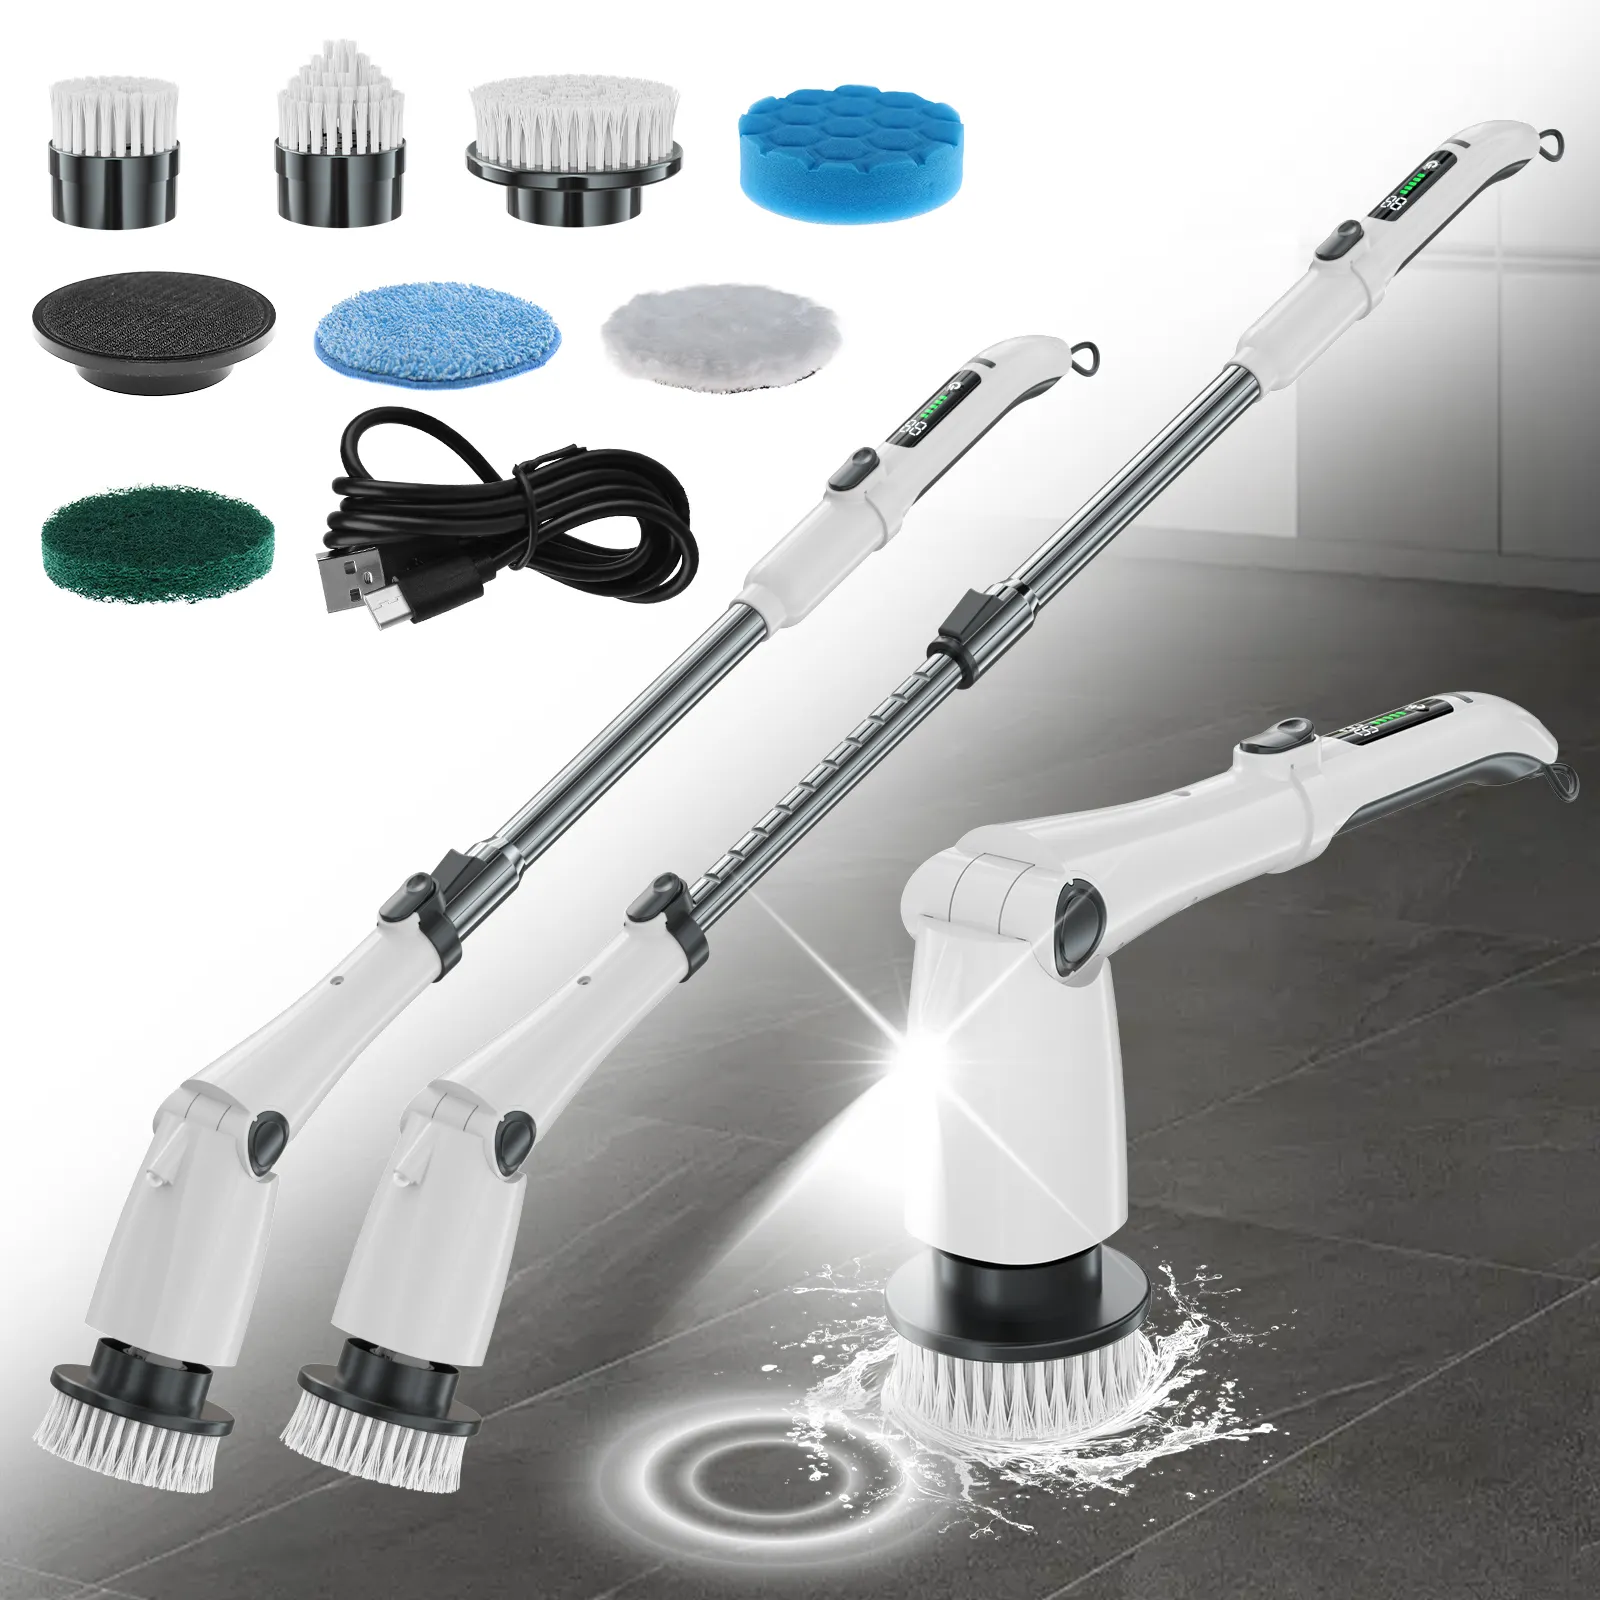 Electric Spin Scrubber, Cordless Cleaning Brush, Shower Cleaning Brush Portable Handheld Scrub for Bathroom Tile Floor Bathtub